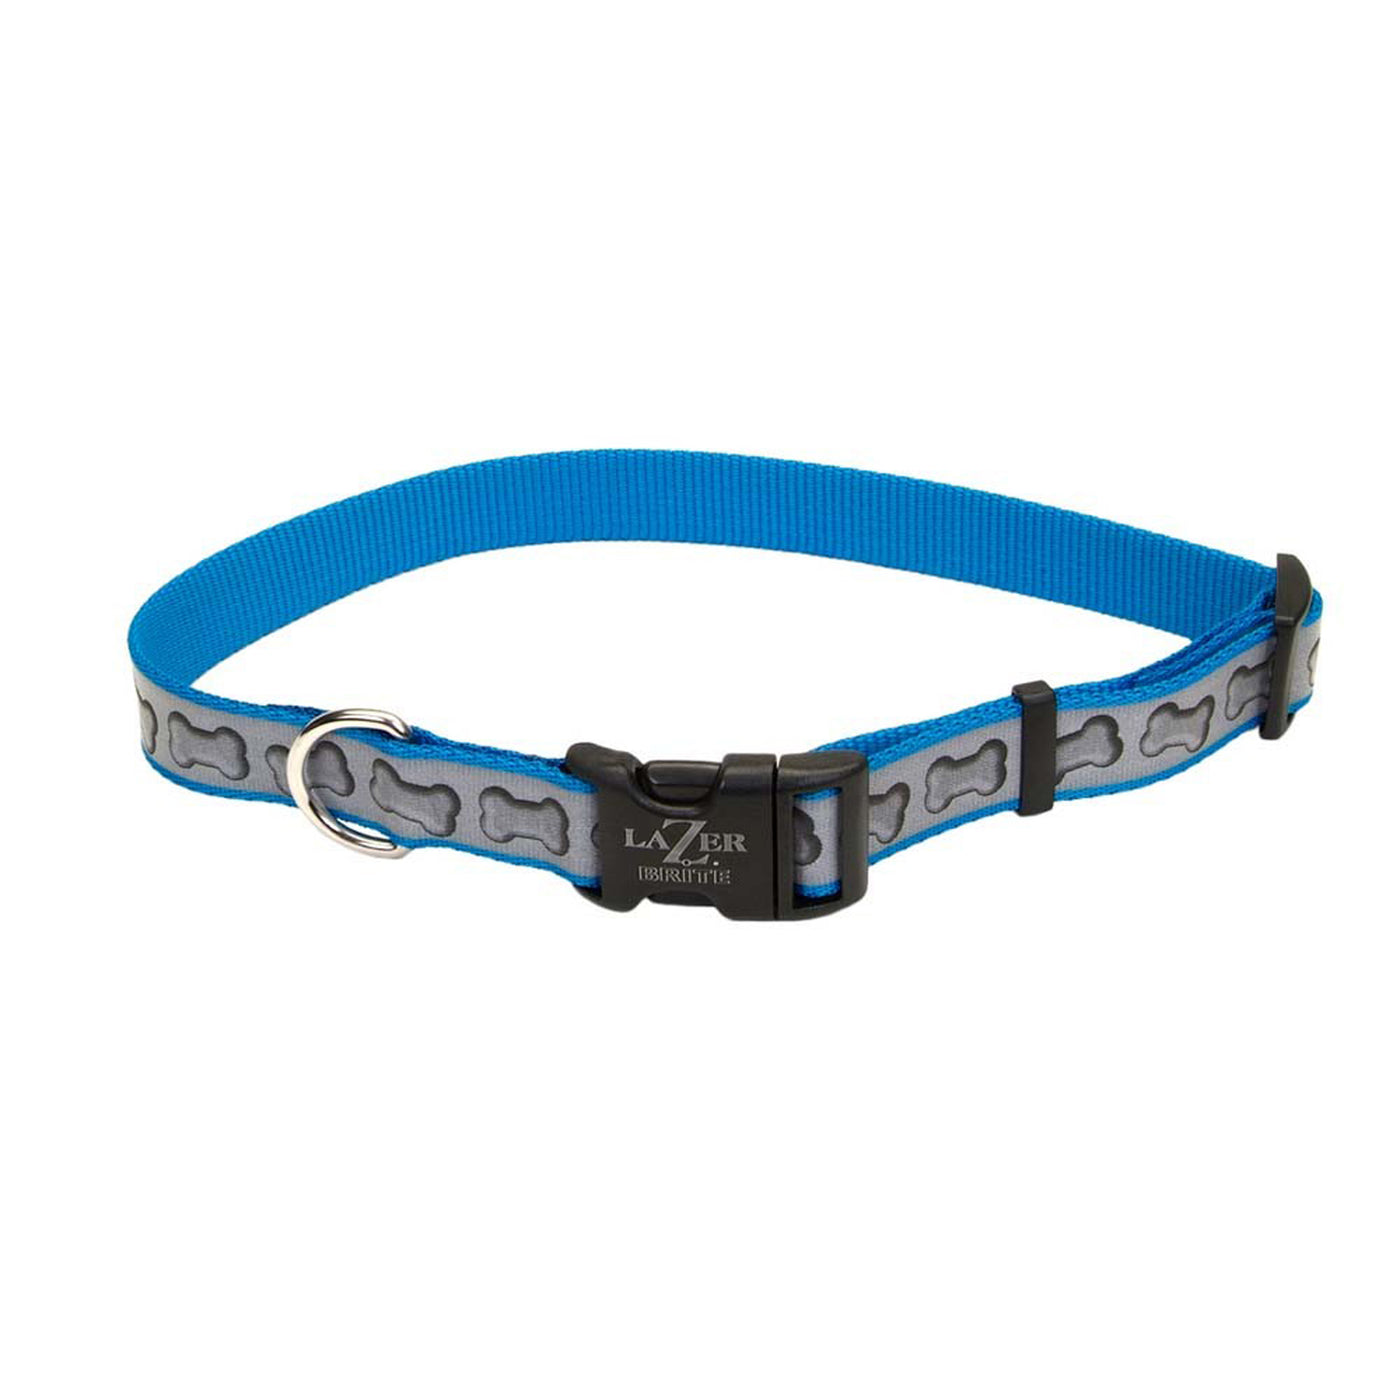 Coastal Brite Reflective Adjustable Dog Collar Turquoise 3/8 In X 8-12 In